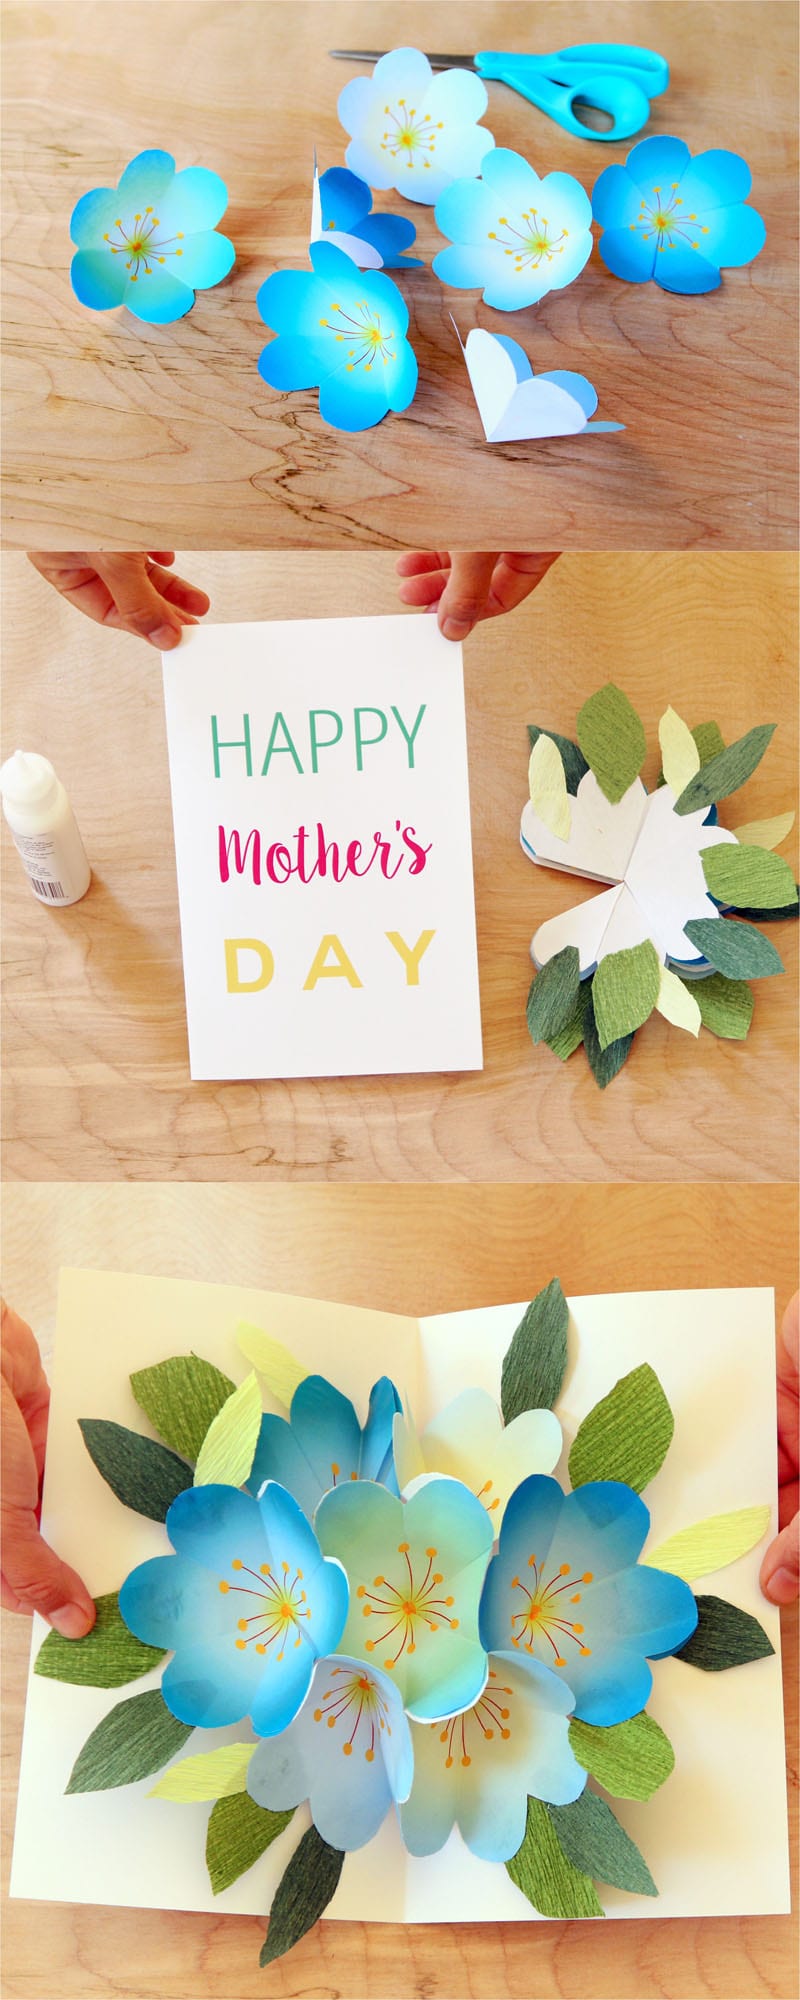 how-to-make-a-pop-up-heart-mother-s-day-card-mothers-day-crafts-for